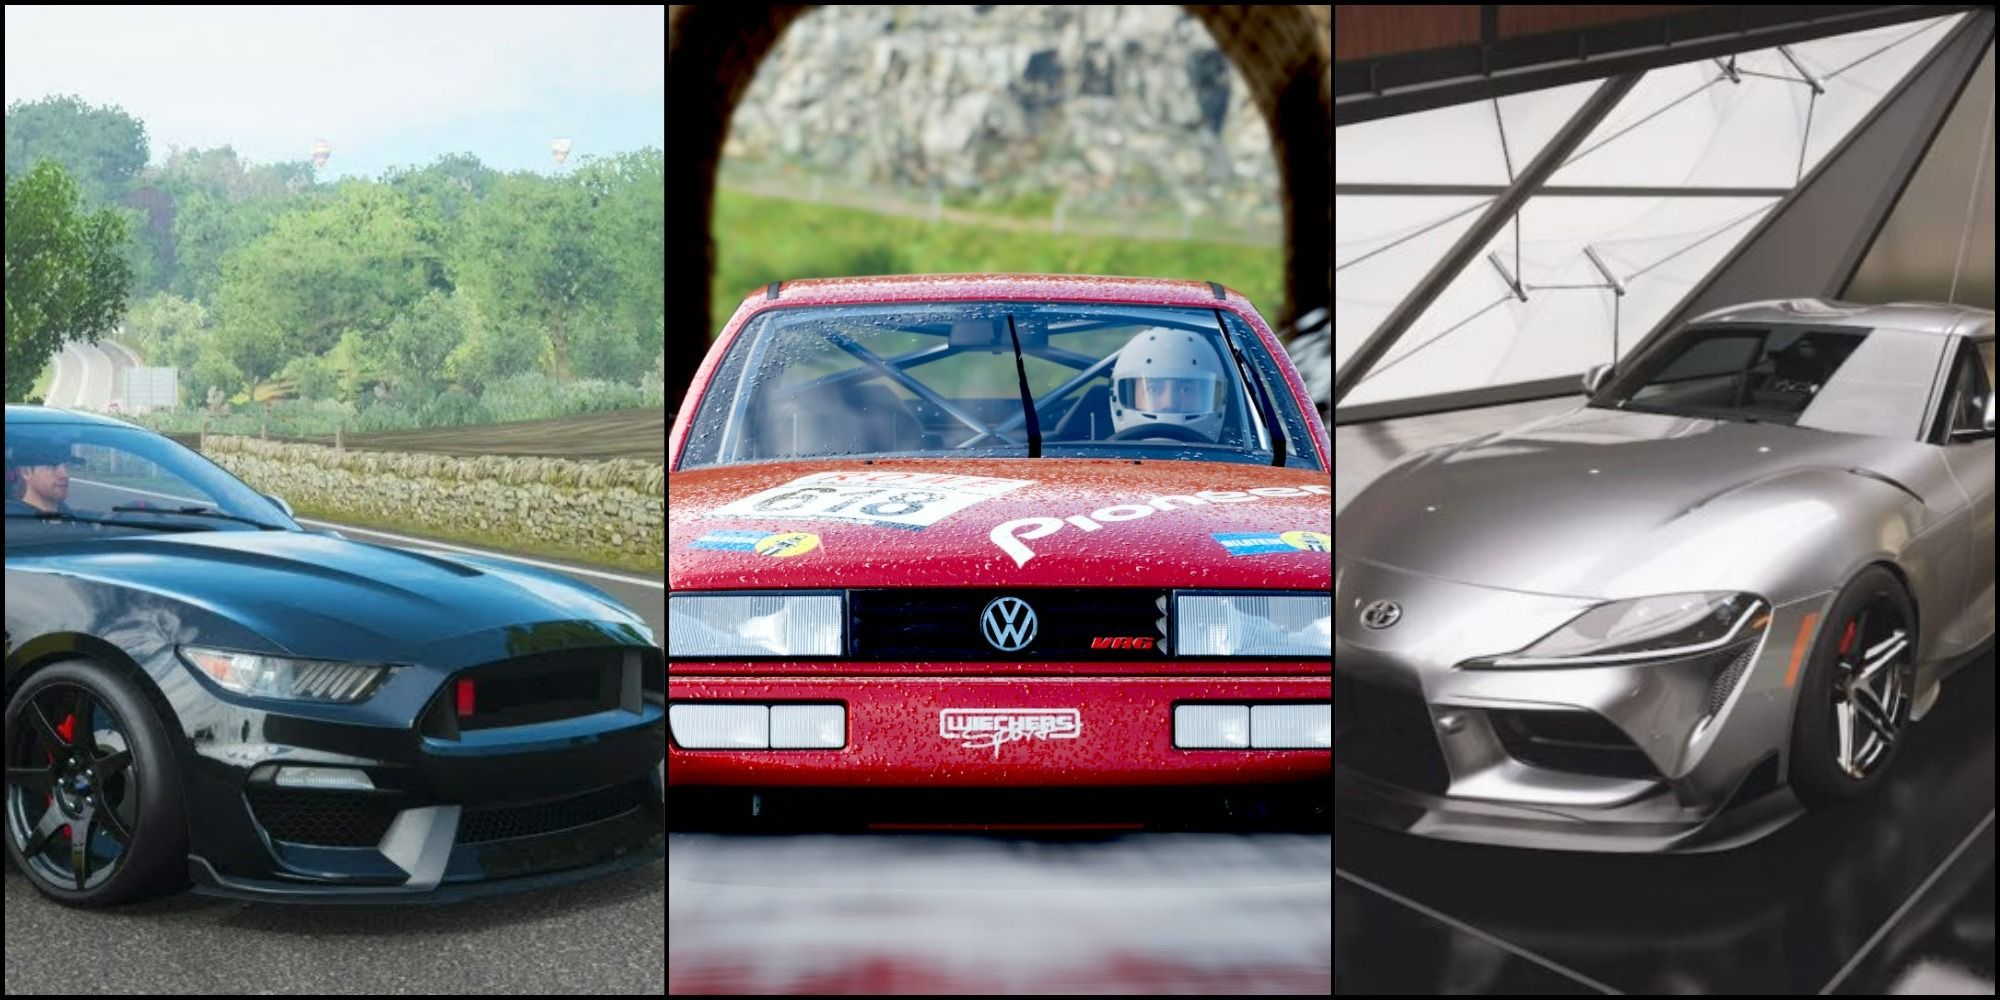 A feature image with the Ford Shelby GT350R to the left, the Volkswagen Corrado VR6 in the middle and the Toyota GR Supra to the right